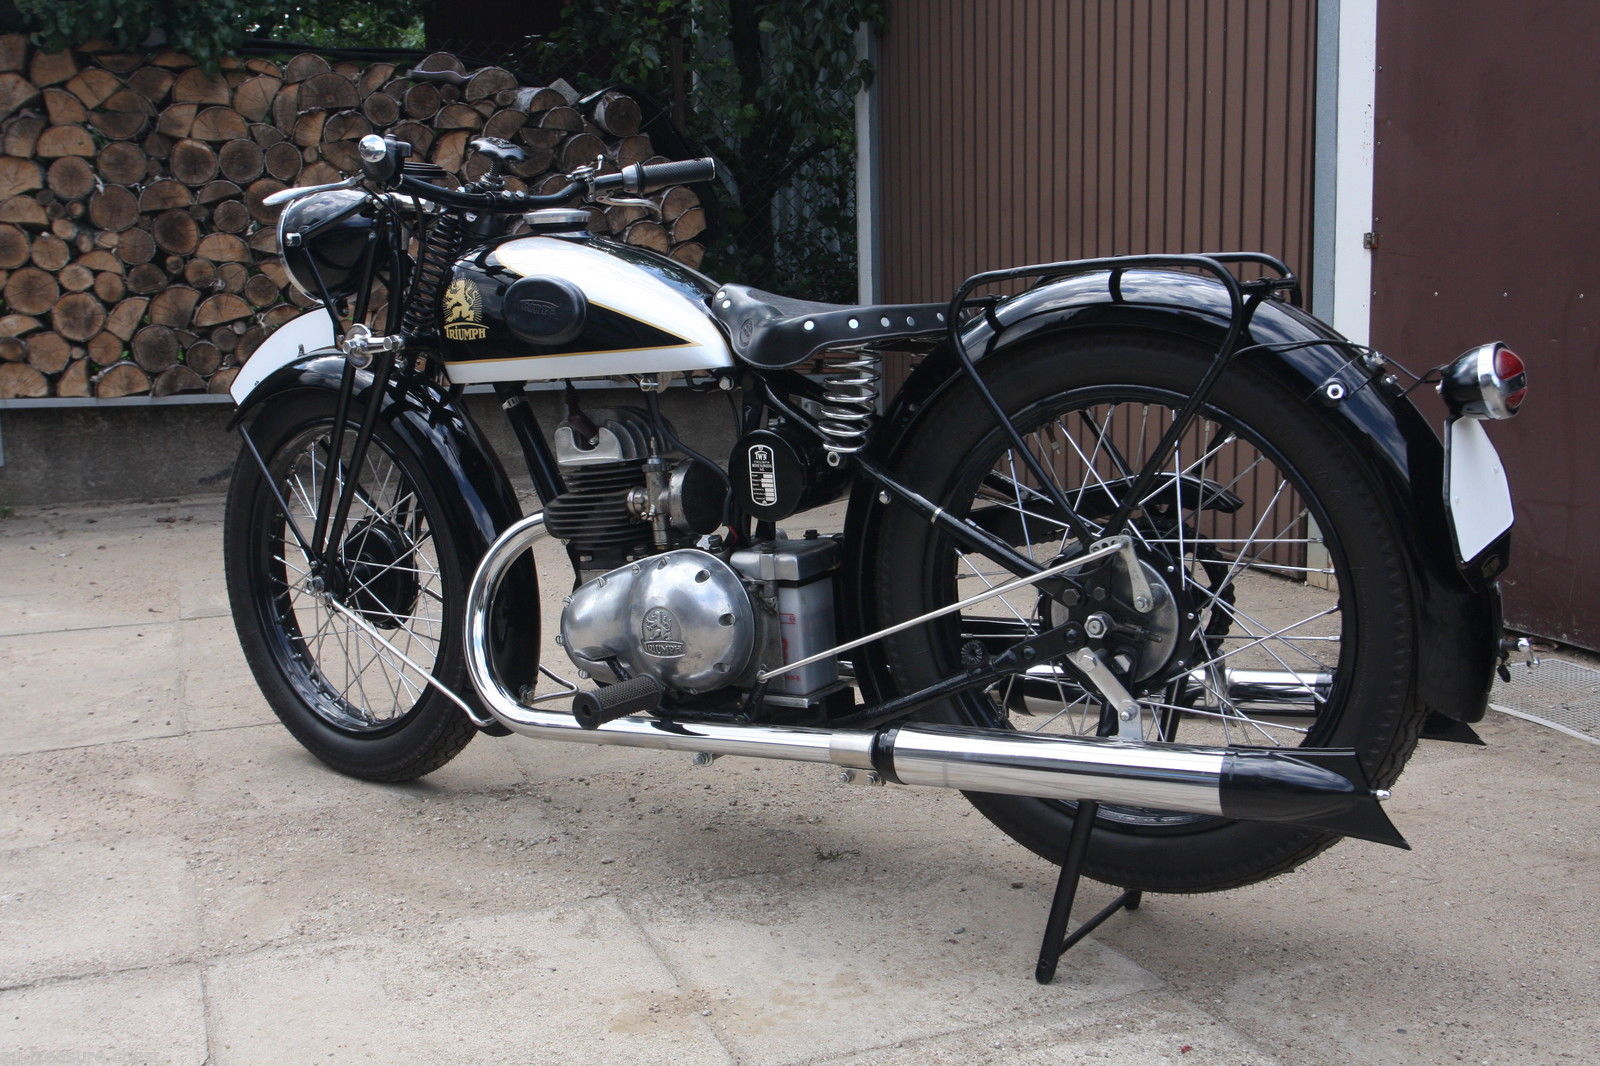 The German TWN motorcycles are distinctive and well made.